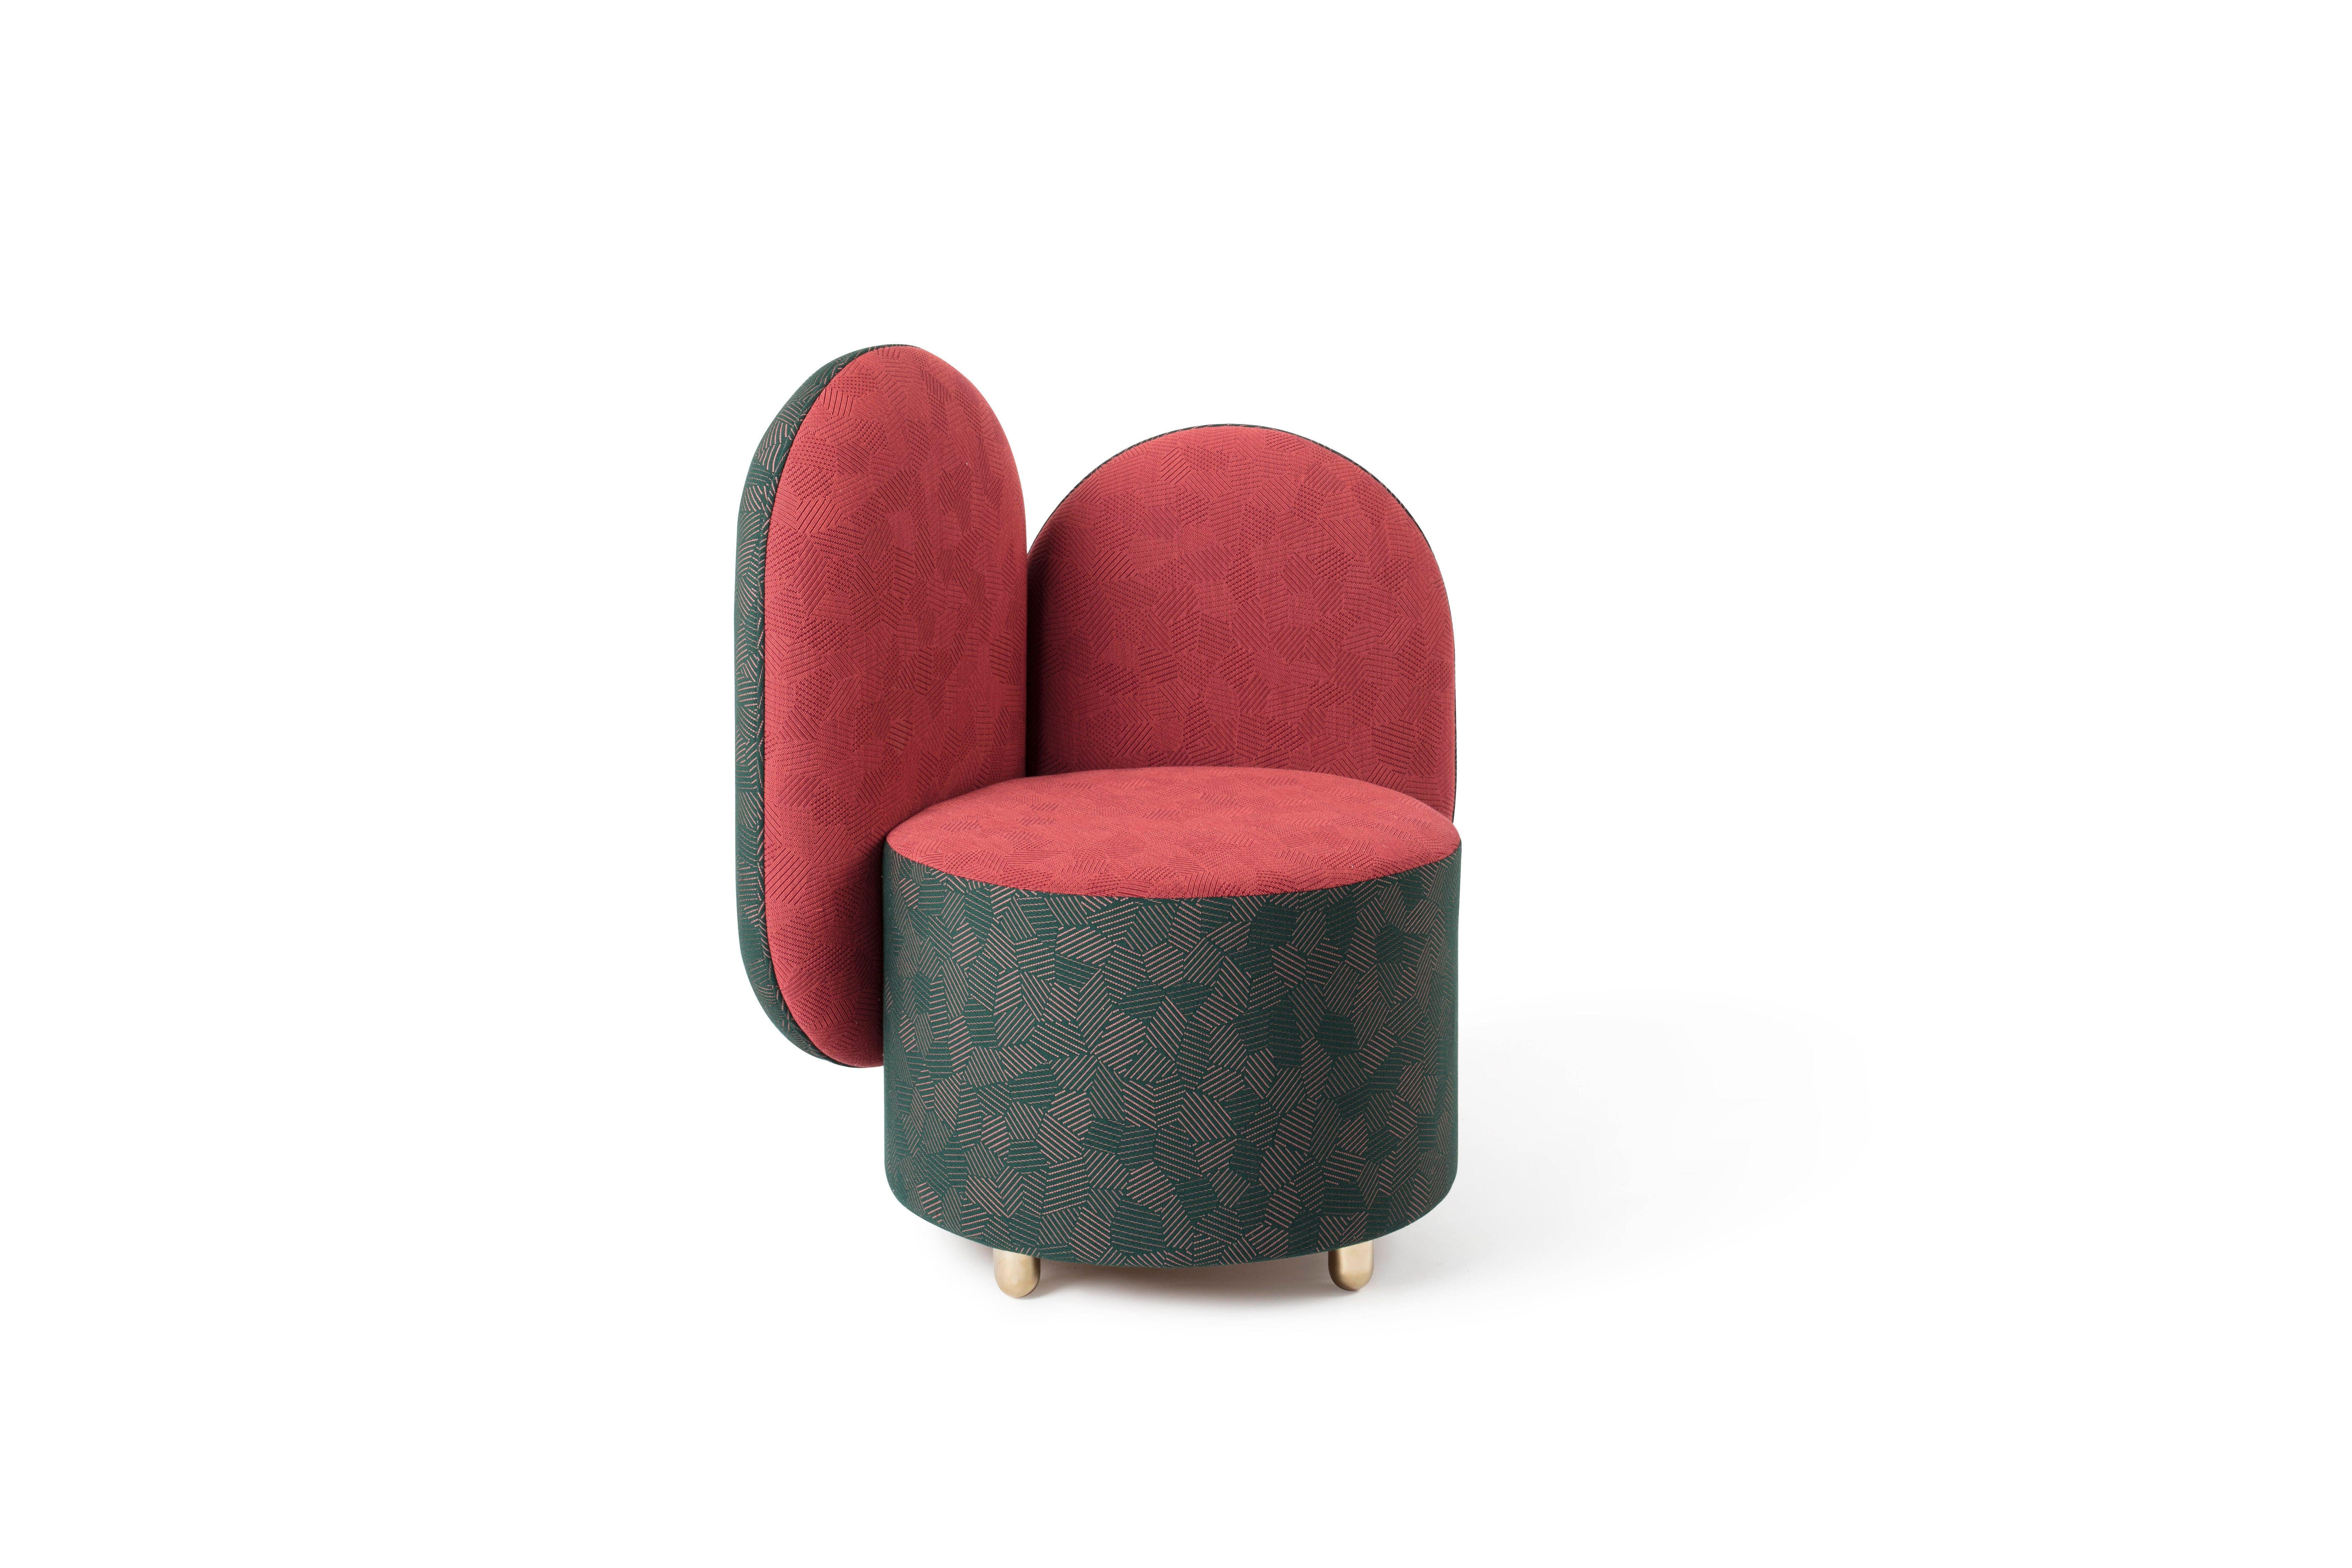 Half Half armchair with ottoman designed by Thomas Dariel, Maison Dada
Measures: W 83 * D 66 * H 90cm
Structure in solid timber and plywood • Memory foam
Base and seating fully upholstered in fabric
Feet in plated metal • glossy Champagne colour